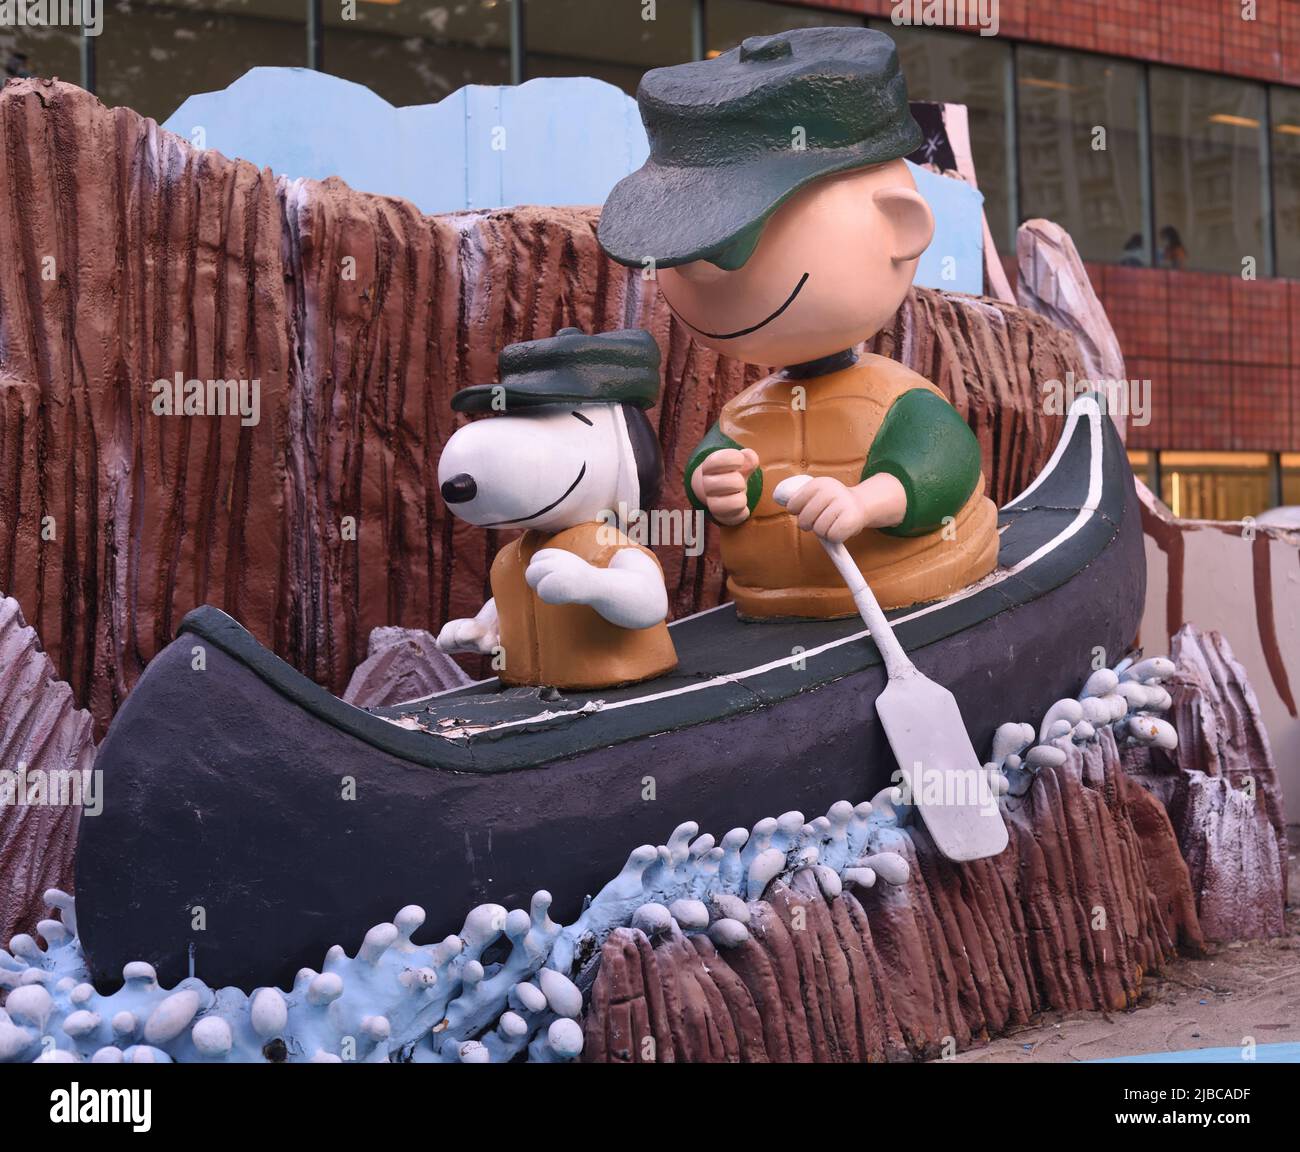 Charlie Brown and Snoopy in a canoe ride Stock Photo